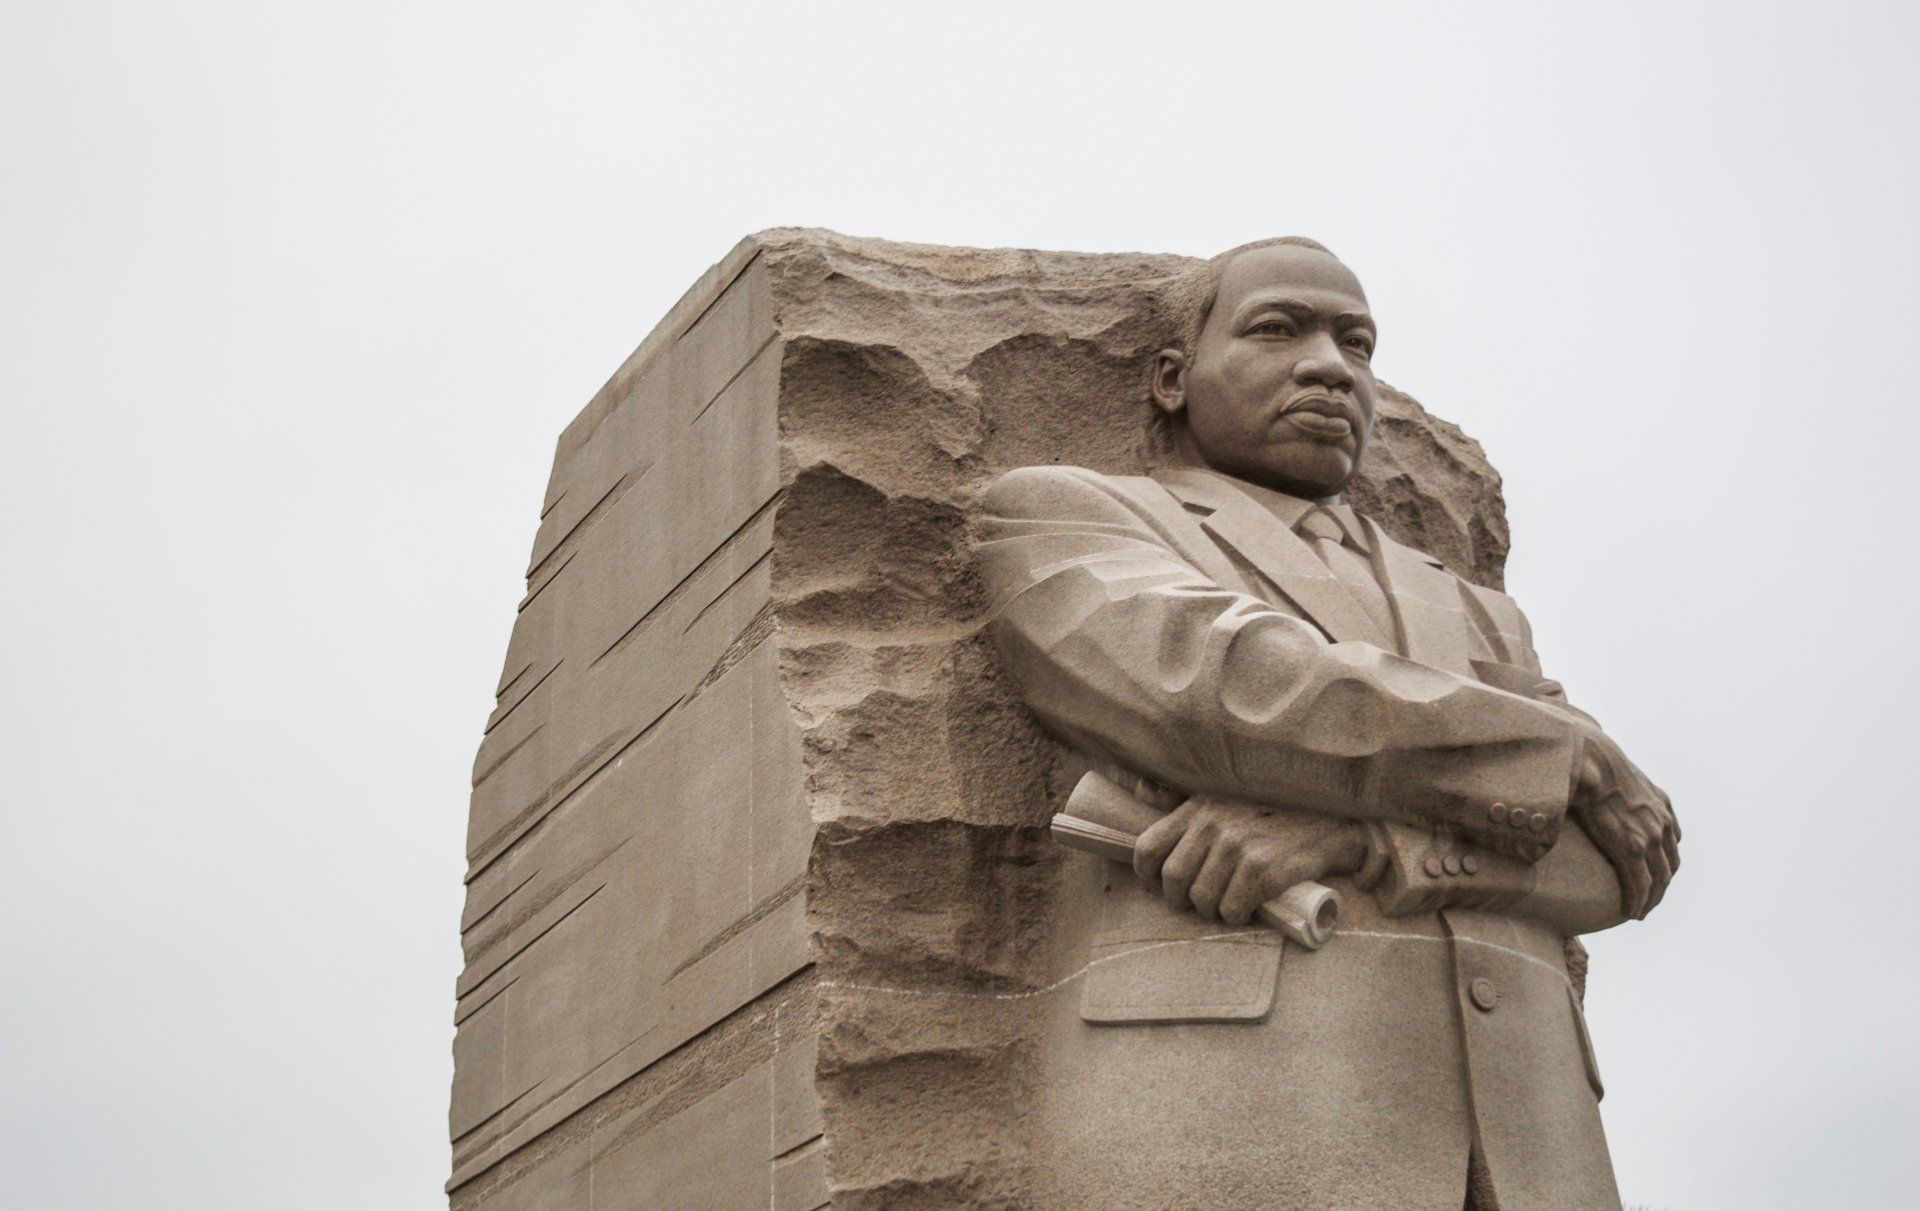 A statue of martin luther king jr. with his arms crossed.